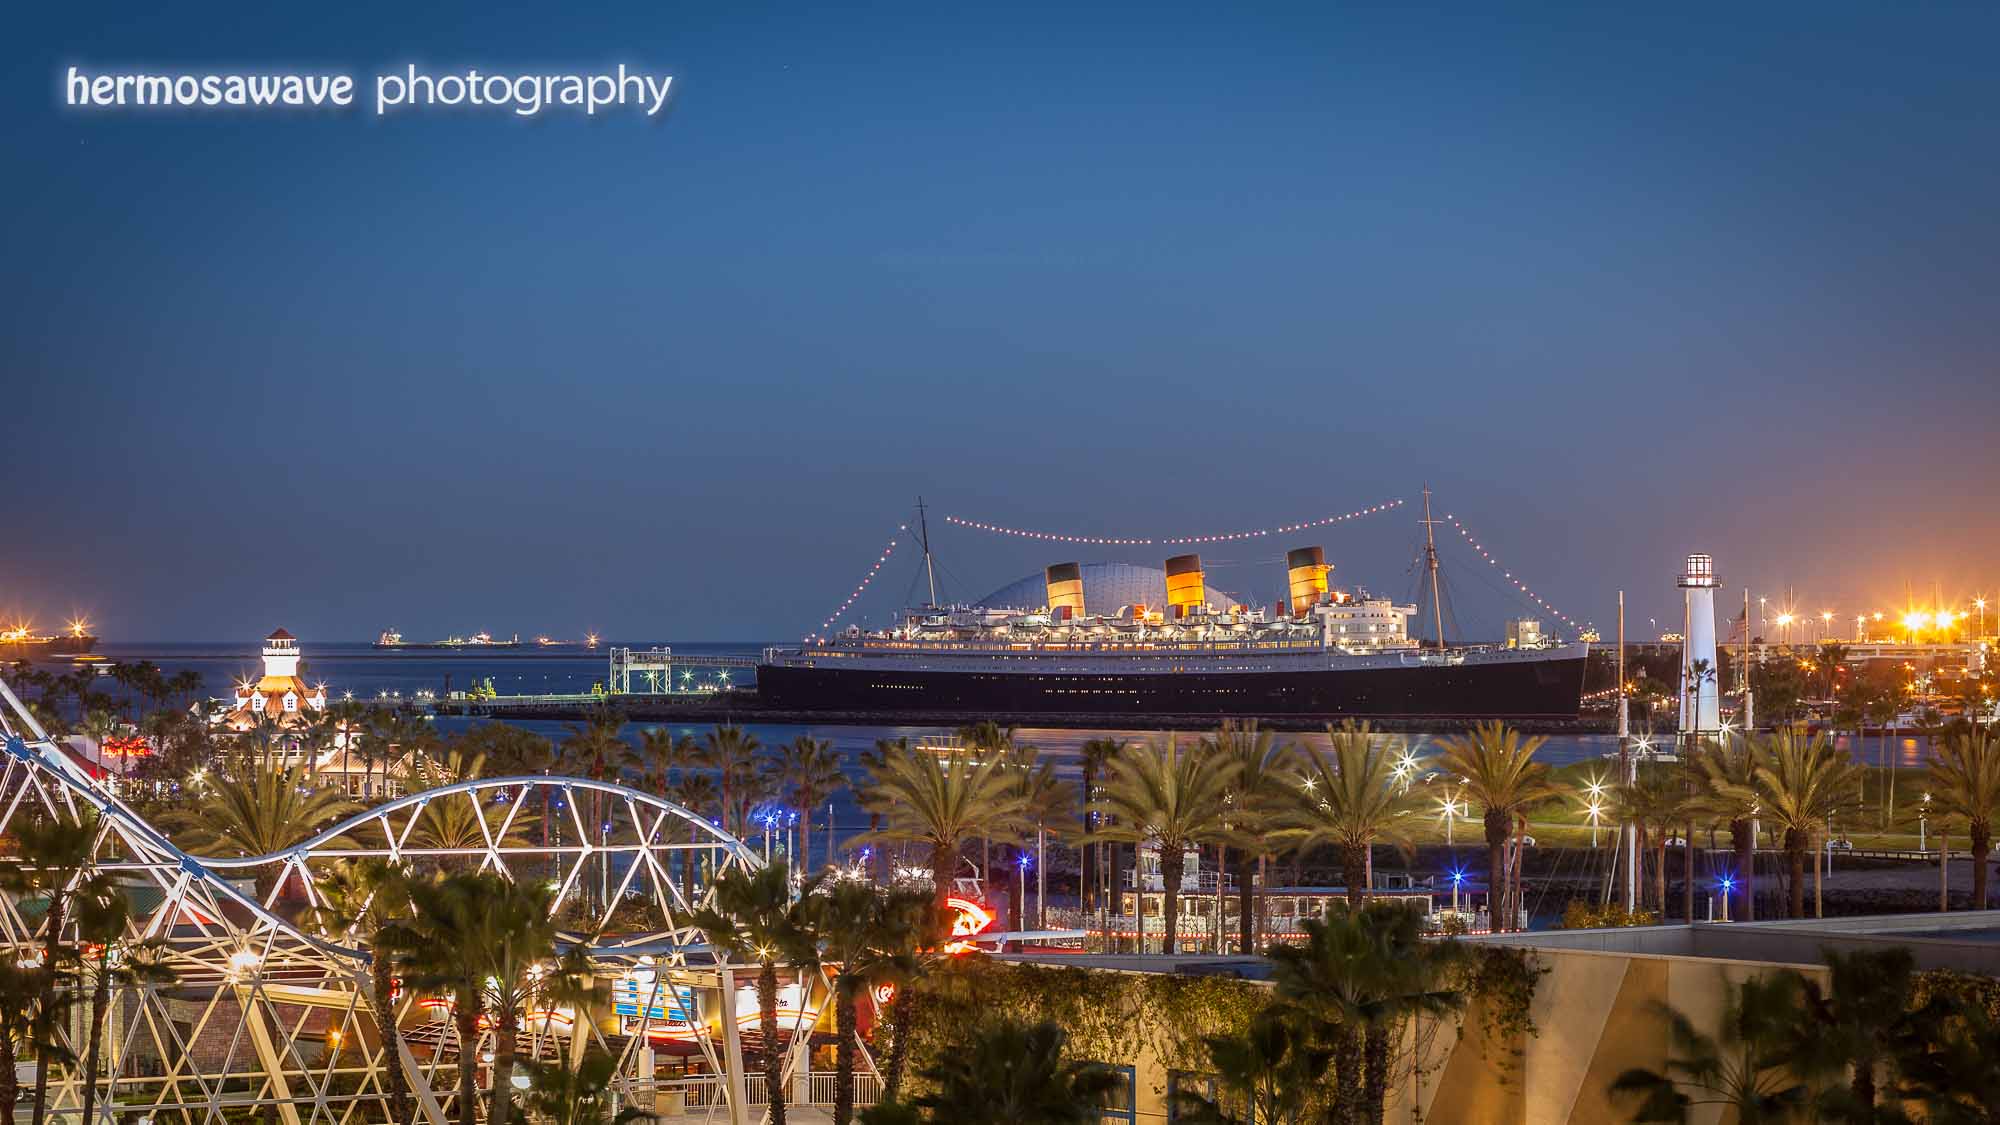 Queen Mary at Dusk